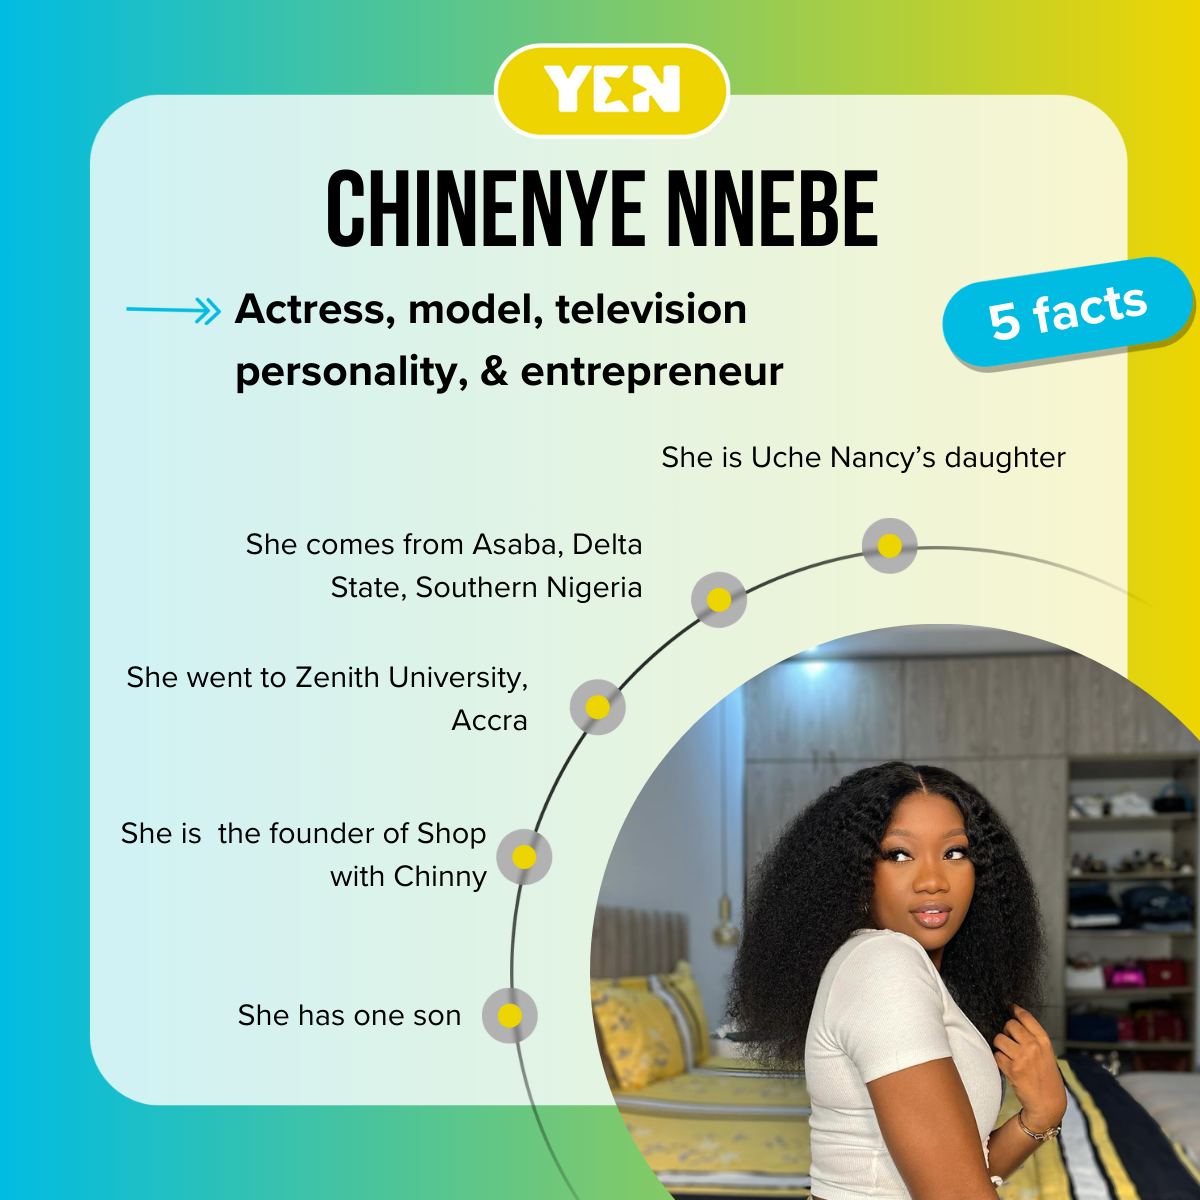 Top-5 facts about Chinenye Nnebe